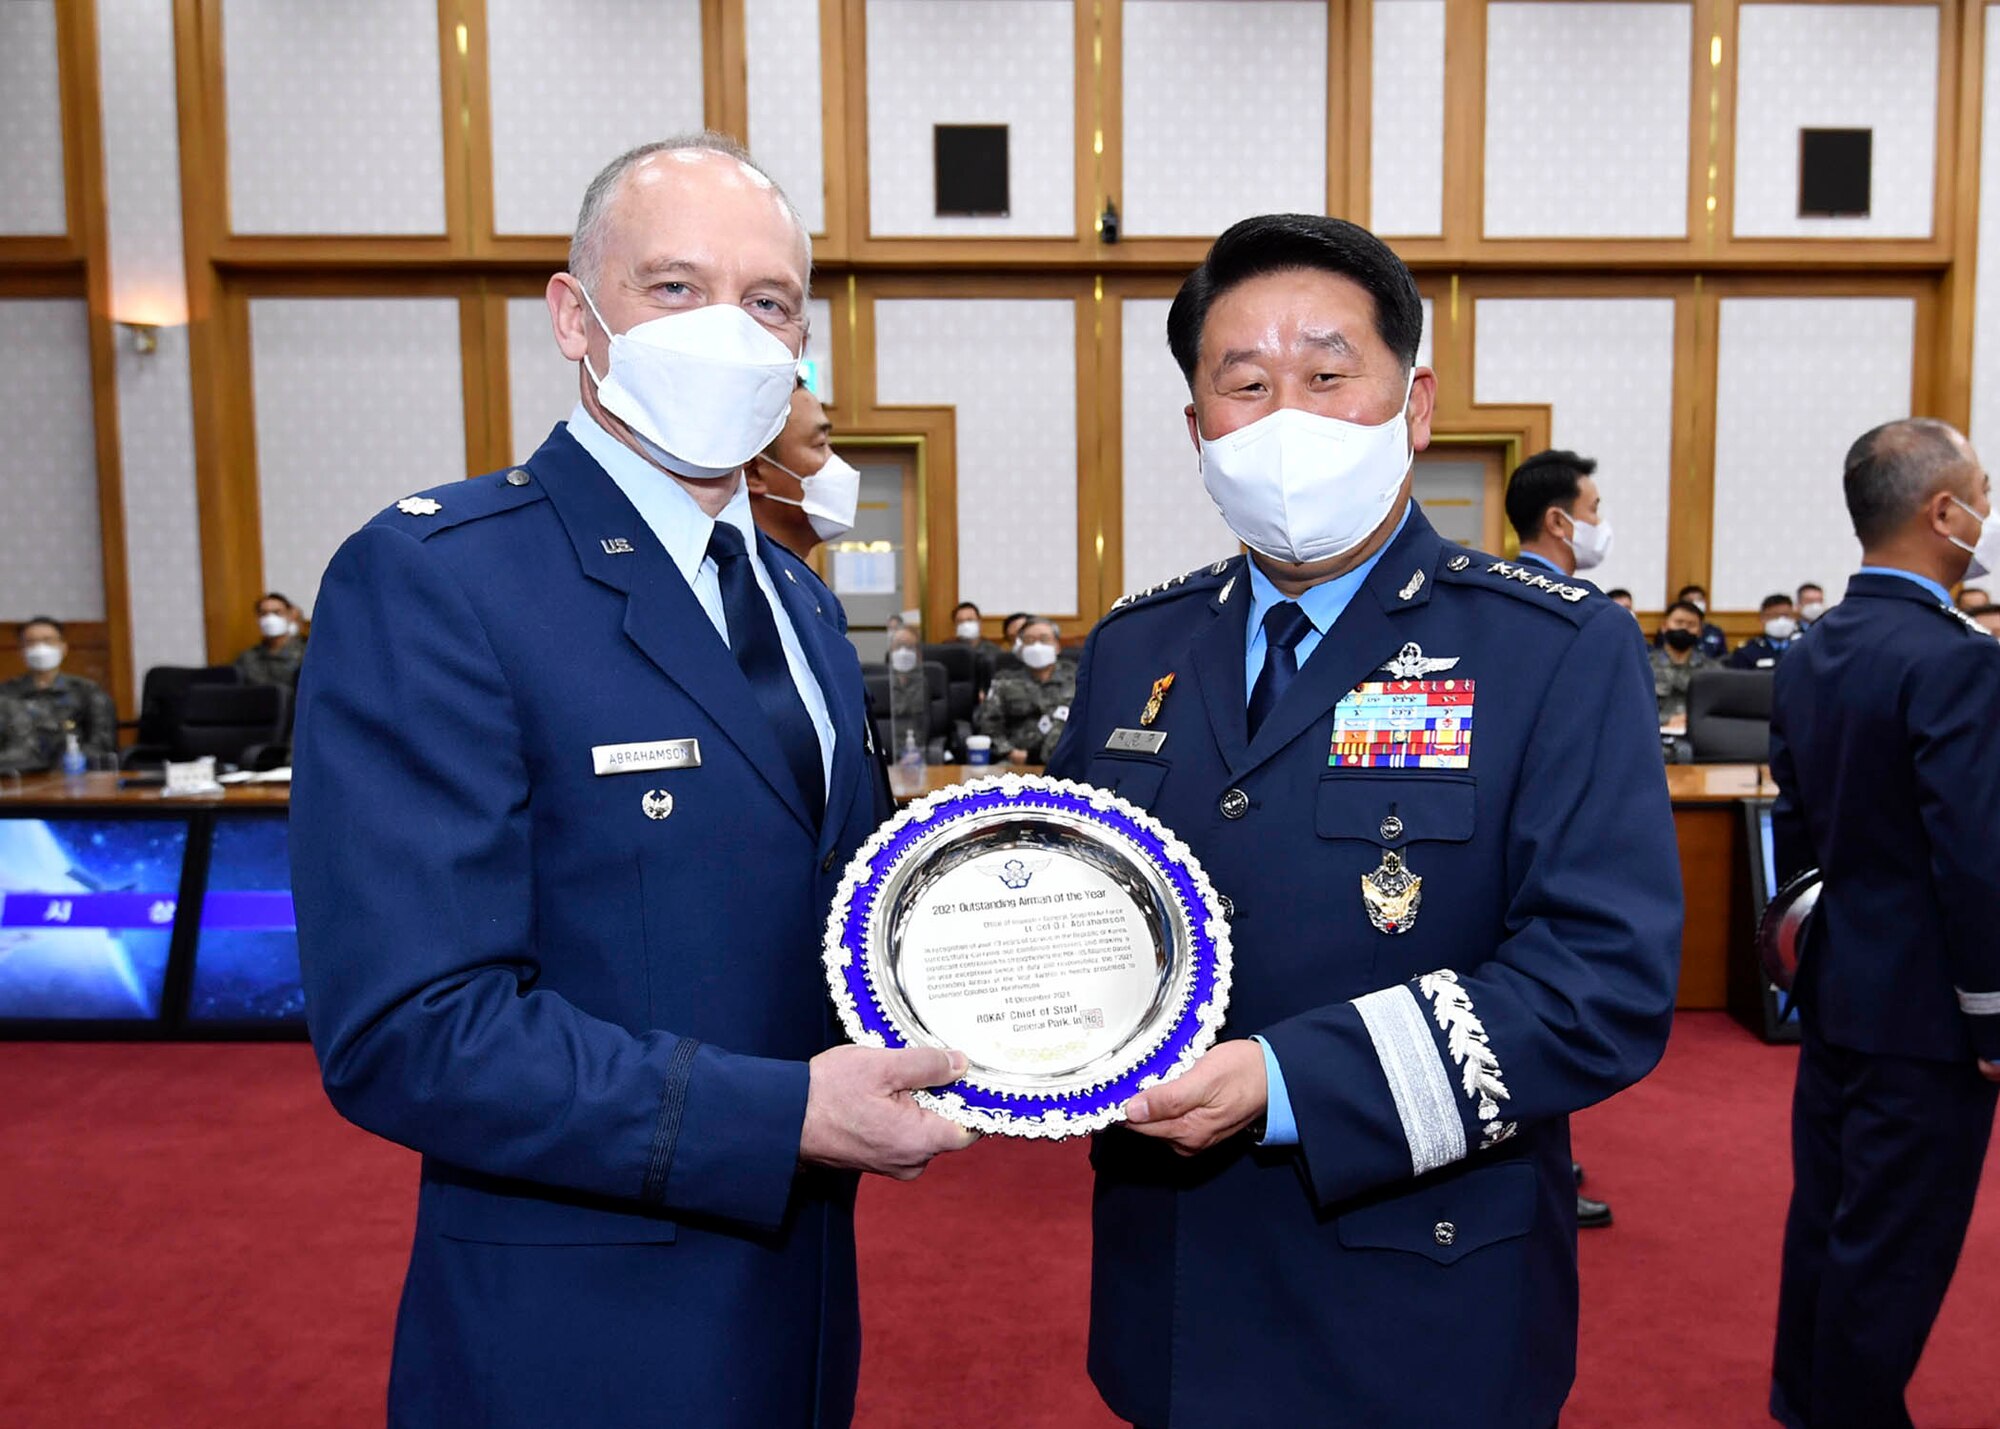 U.S. Air Force Lt. Col. DJ Abrahamson, Seventh Air Force Inspector General, and Gen. In-Ho Park, Republic of Korea Air Force Chief of Staff, pose for a photo during an award ceremony December 24, 2021 at the ROKAF Headquarters, Republic of Korea. (Republic of Korea Air Force courtesy photo)